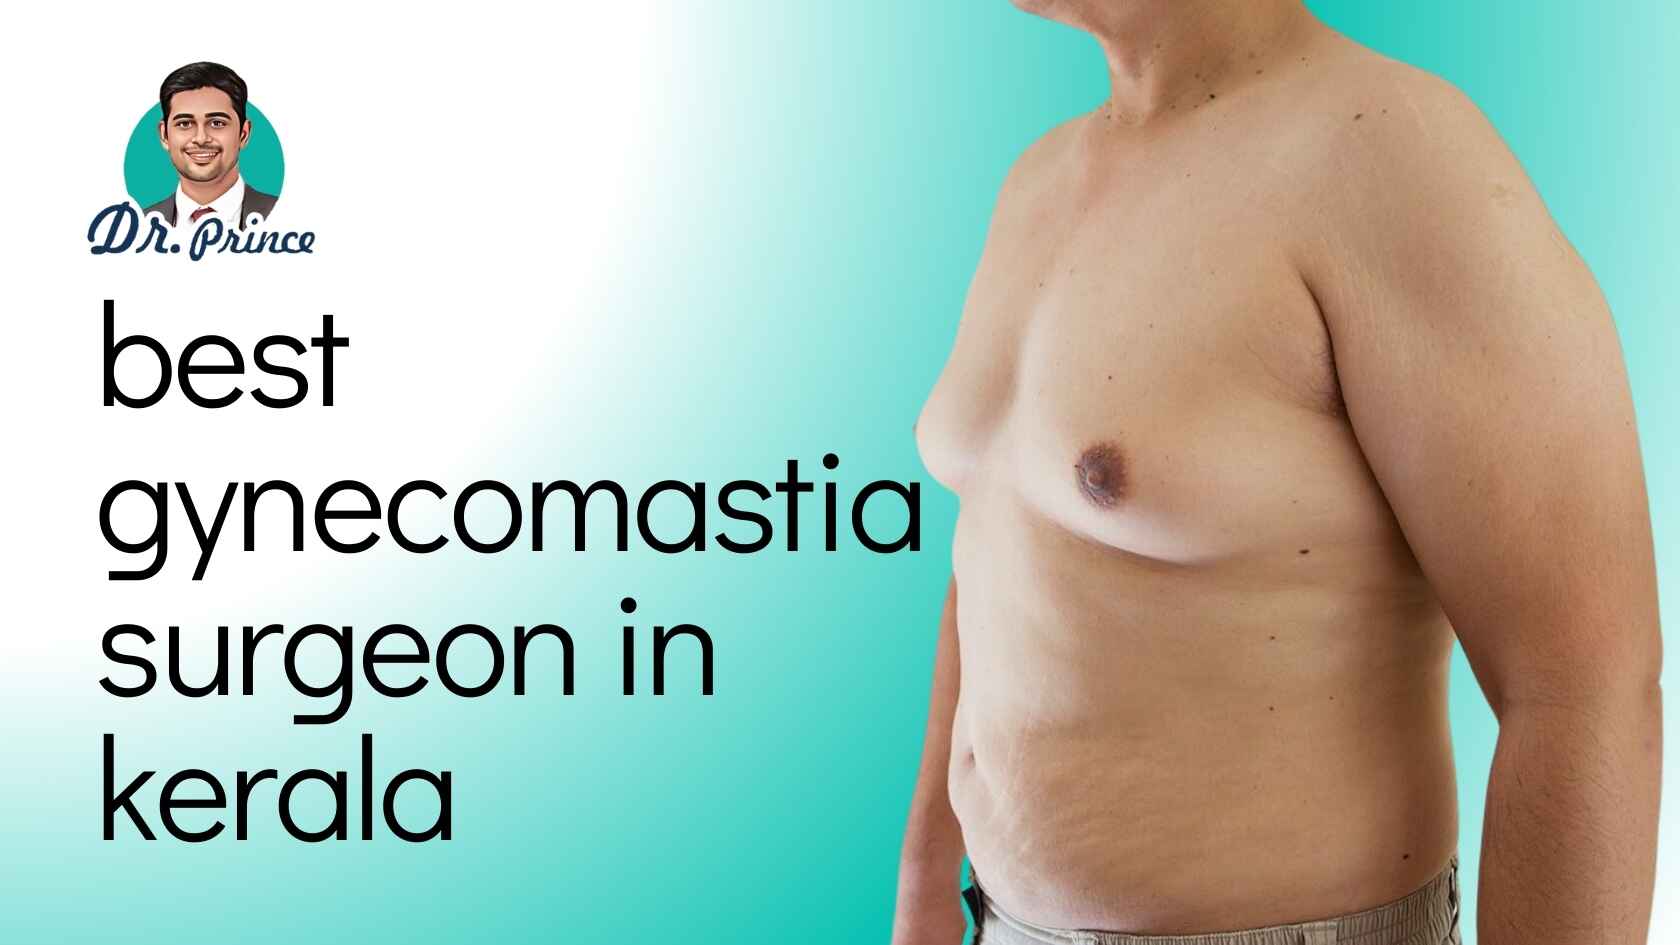 Dr. Prince, a renowned plastic surgeon at Elite Hospital in Thrissur, Kerala, specializes in gynecomastia surgery.